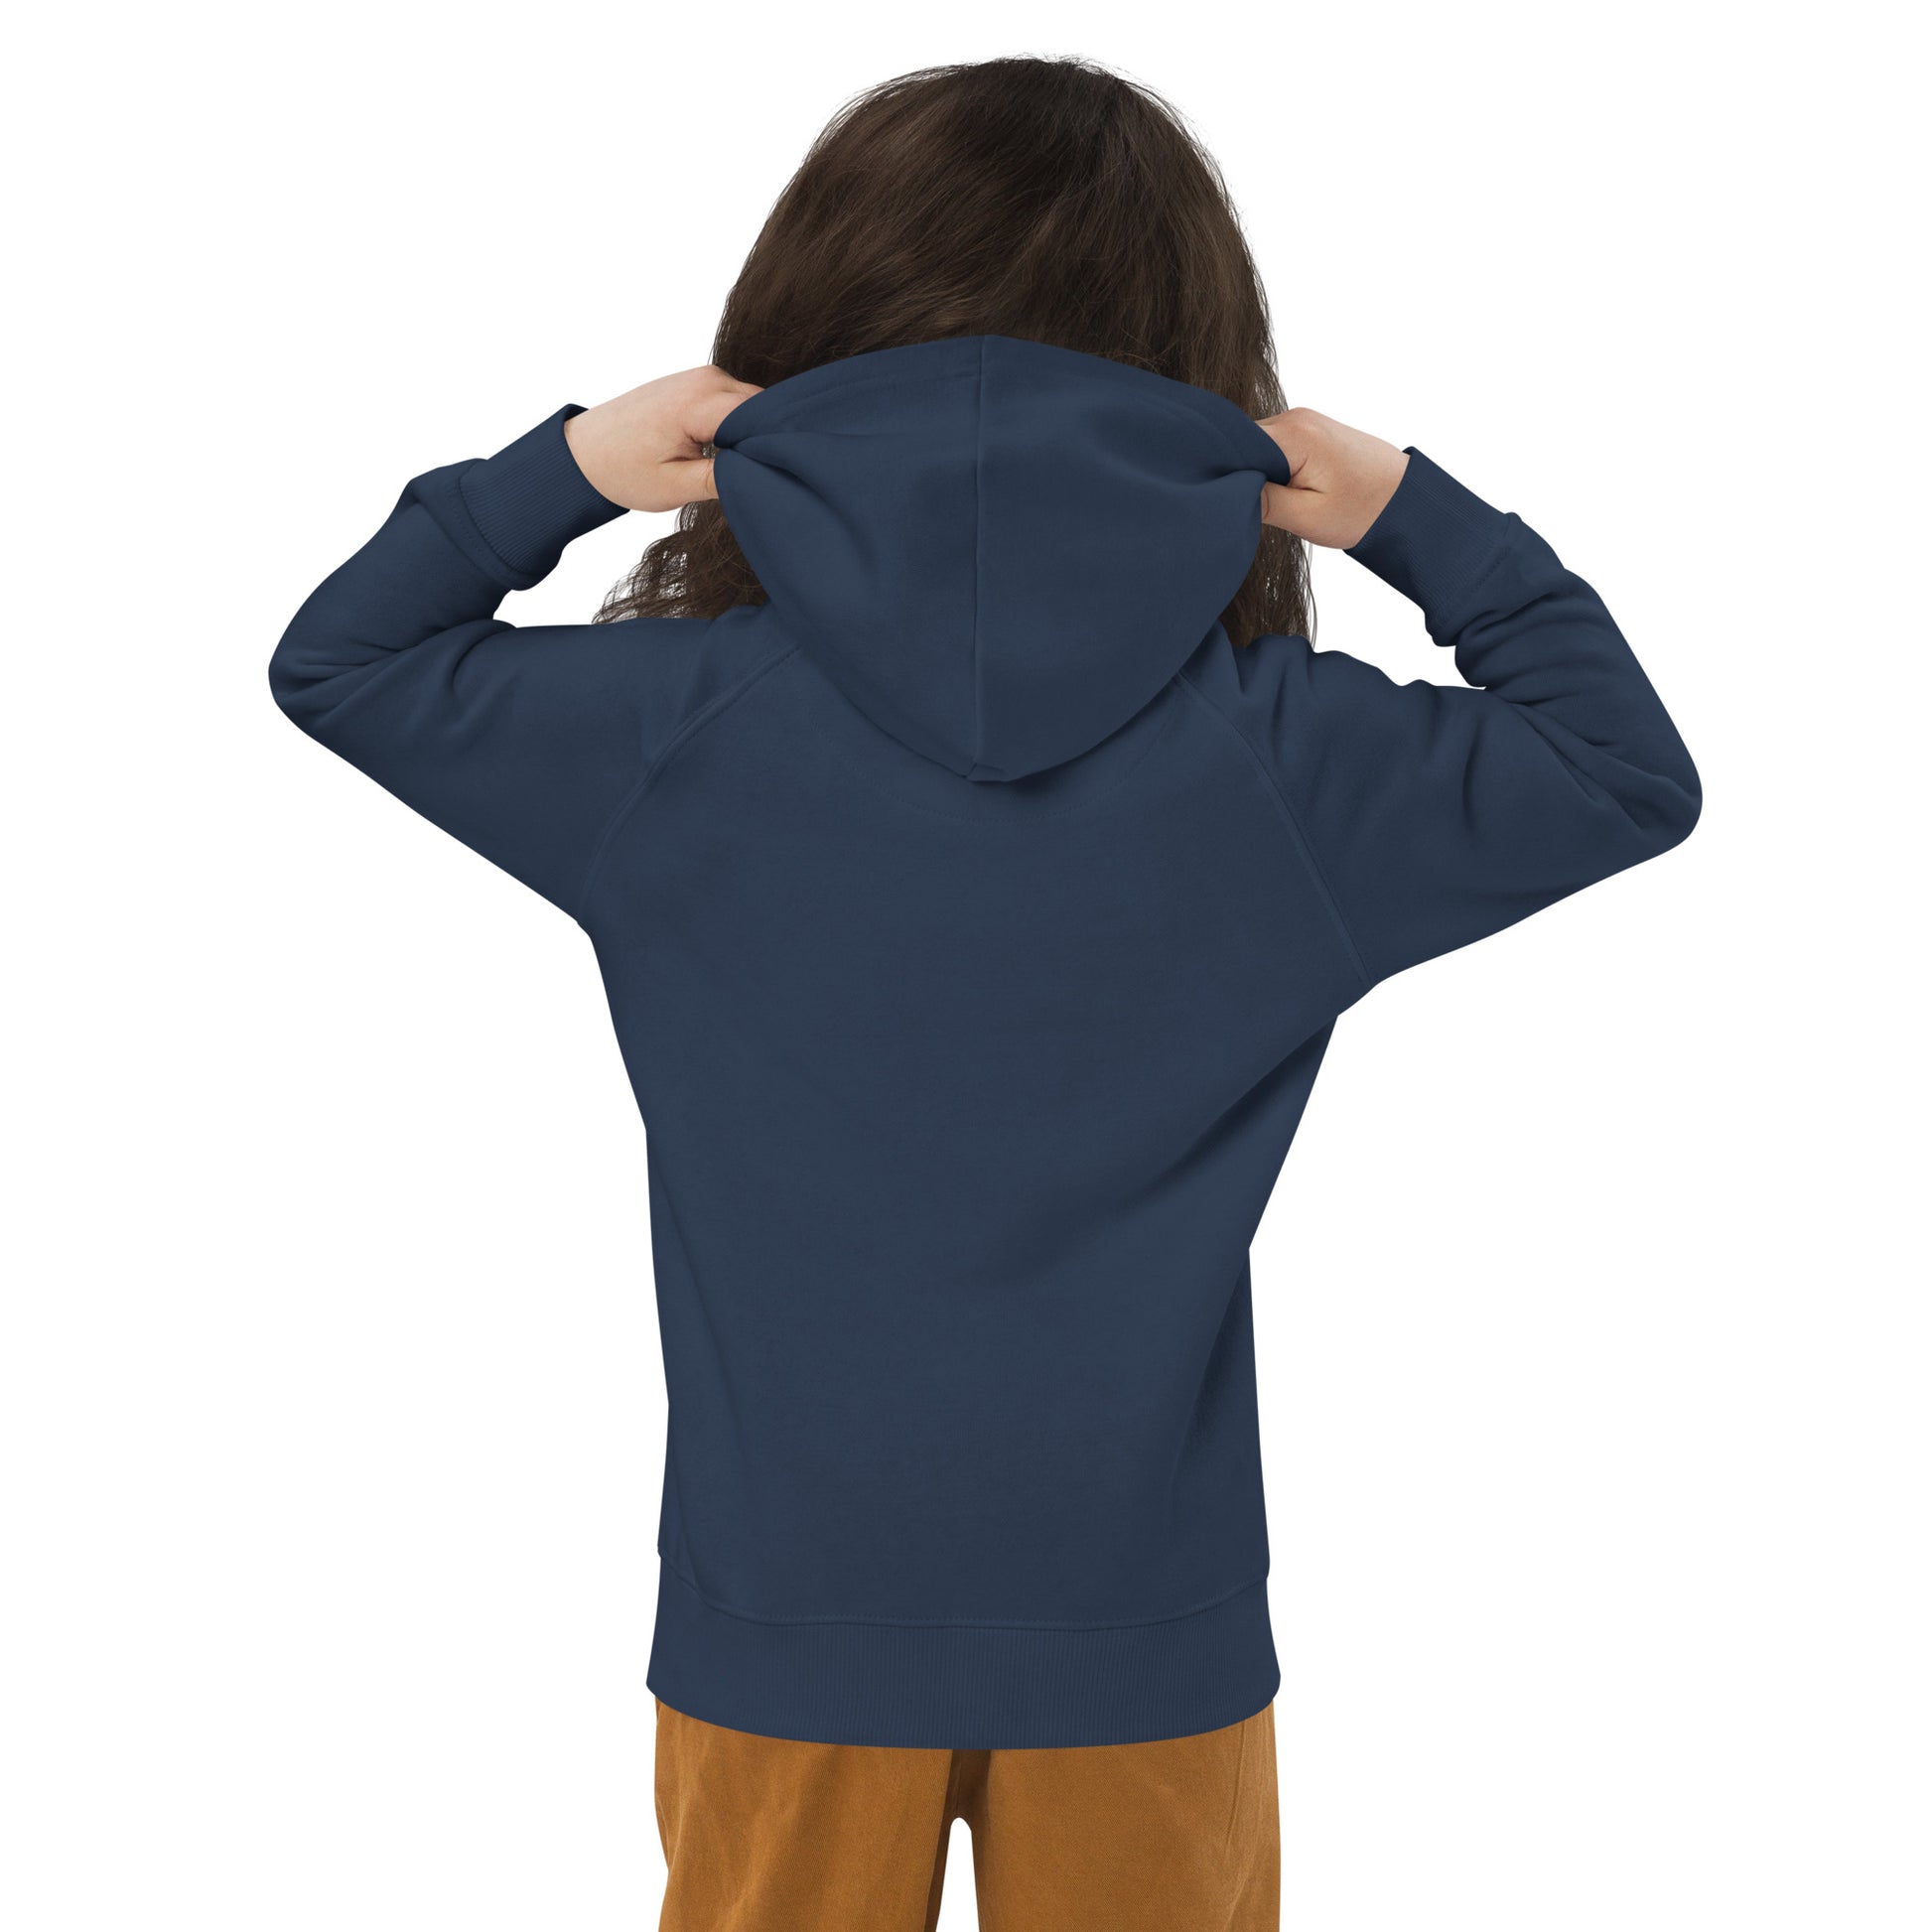 Kid's Sustainable Hoodie - Green Graphic • ICN Seoul • YHM Designs - Image 08